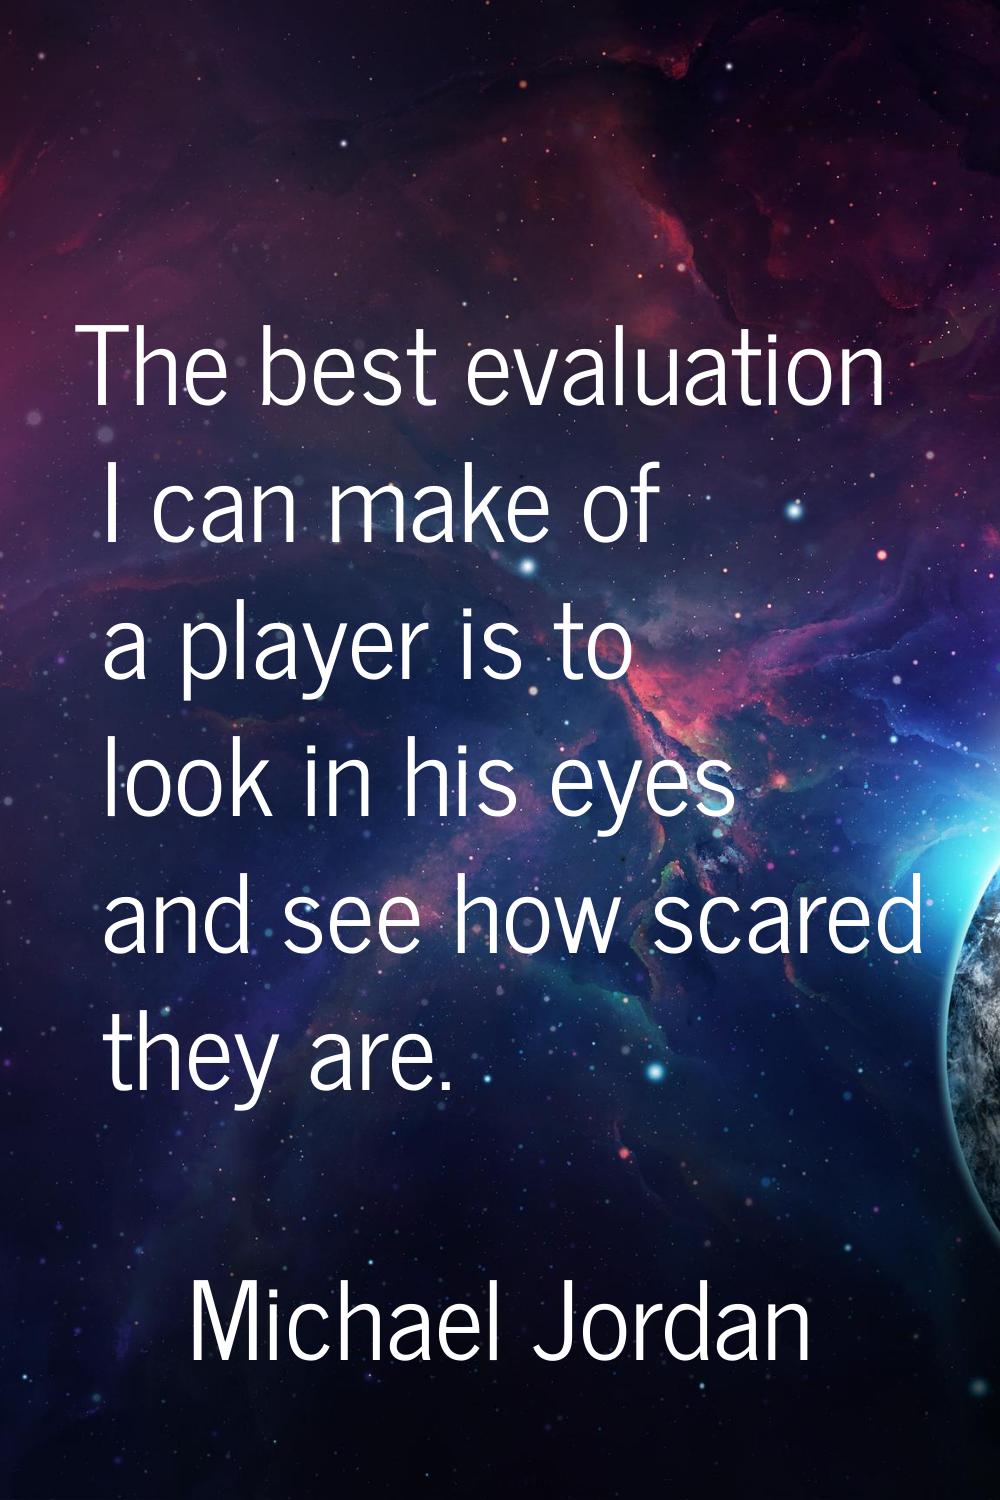 The best evaluation I can make of a player is to look in his eyes and see how scared they are.